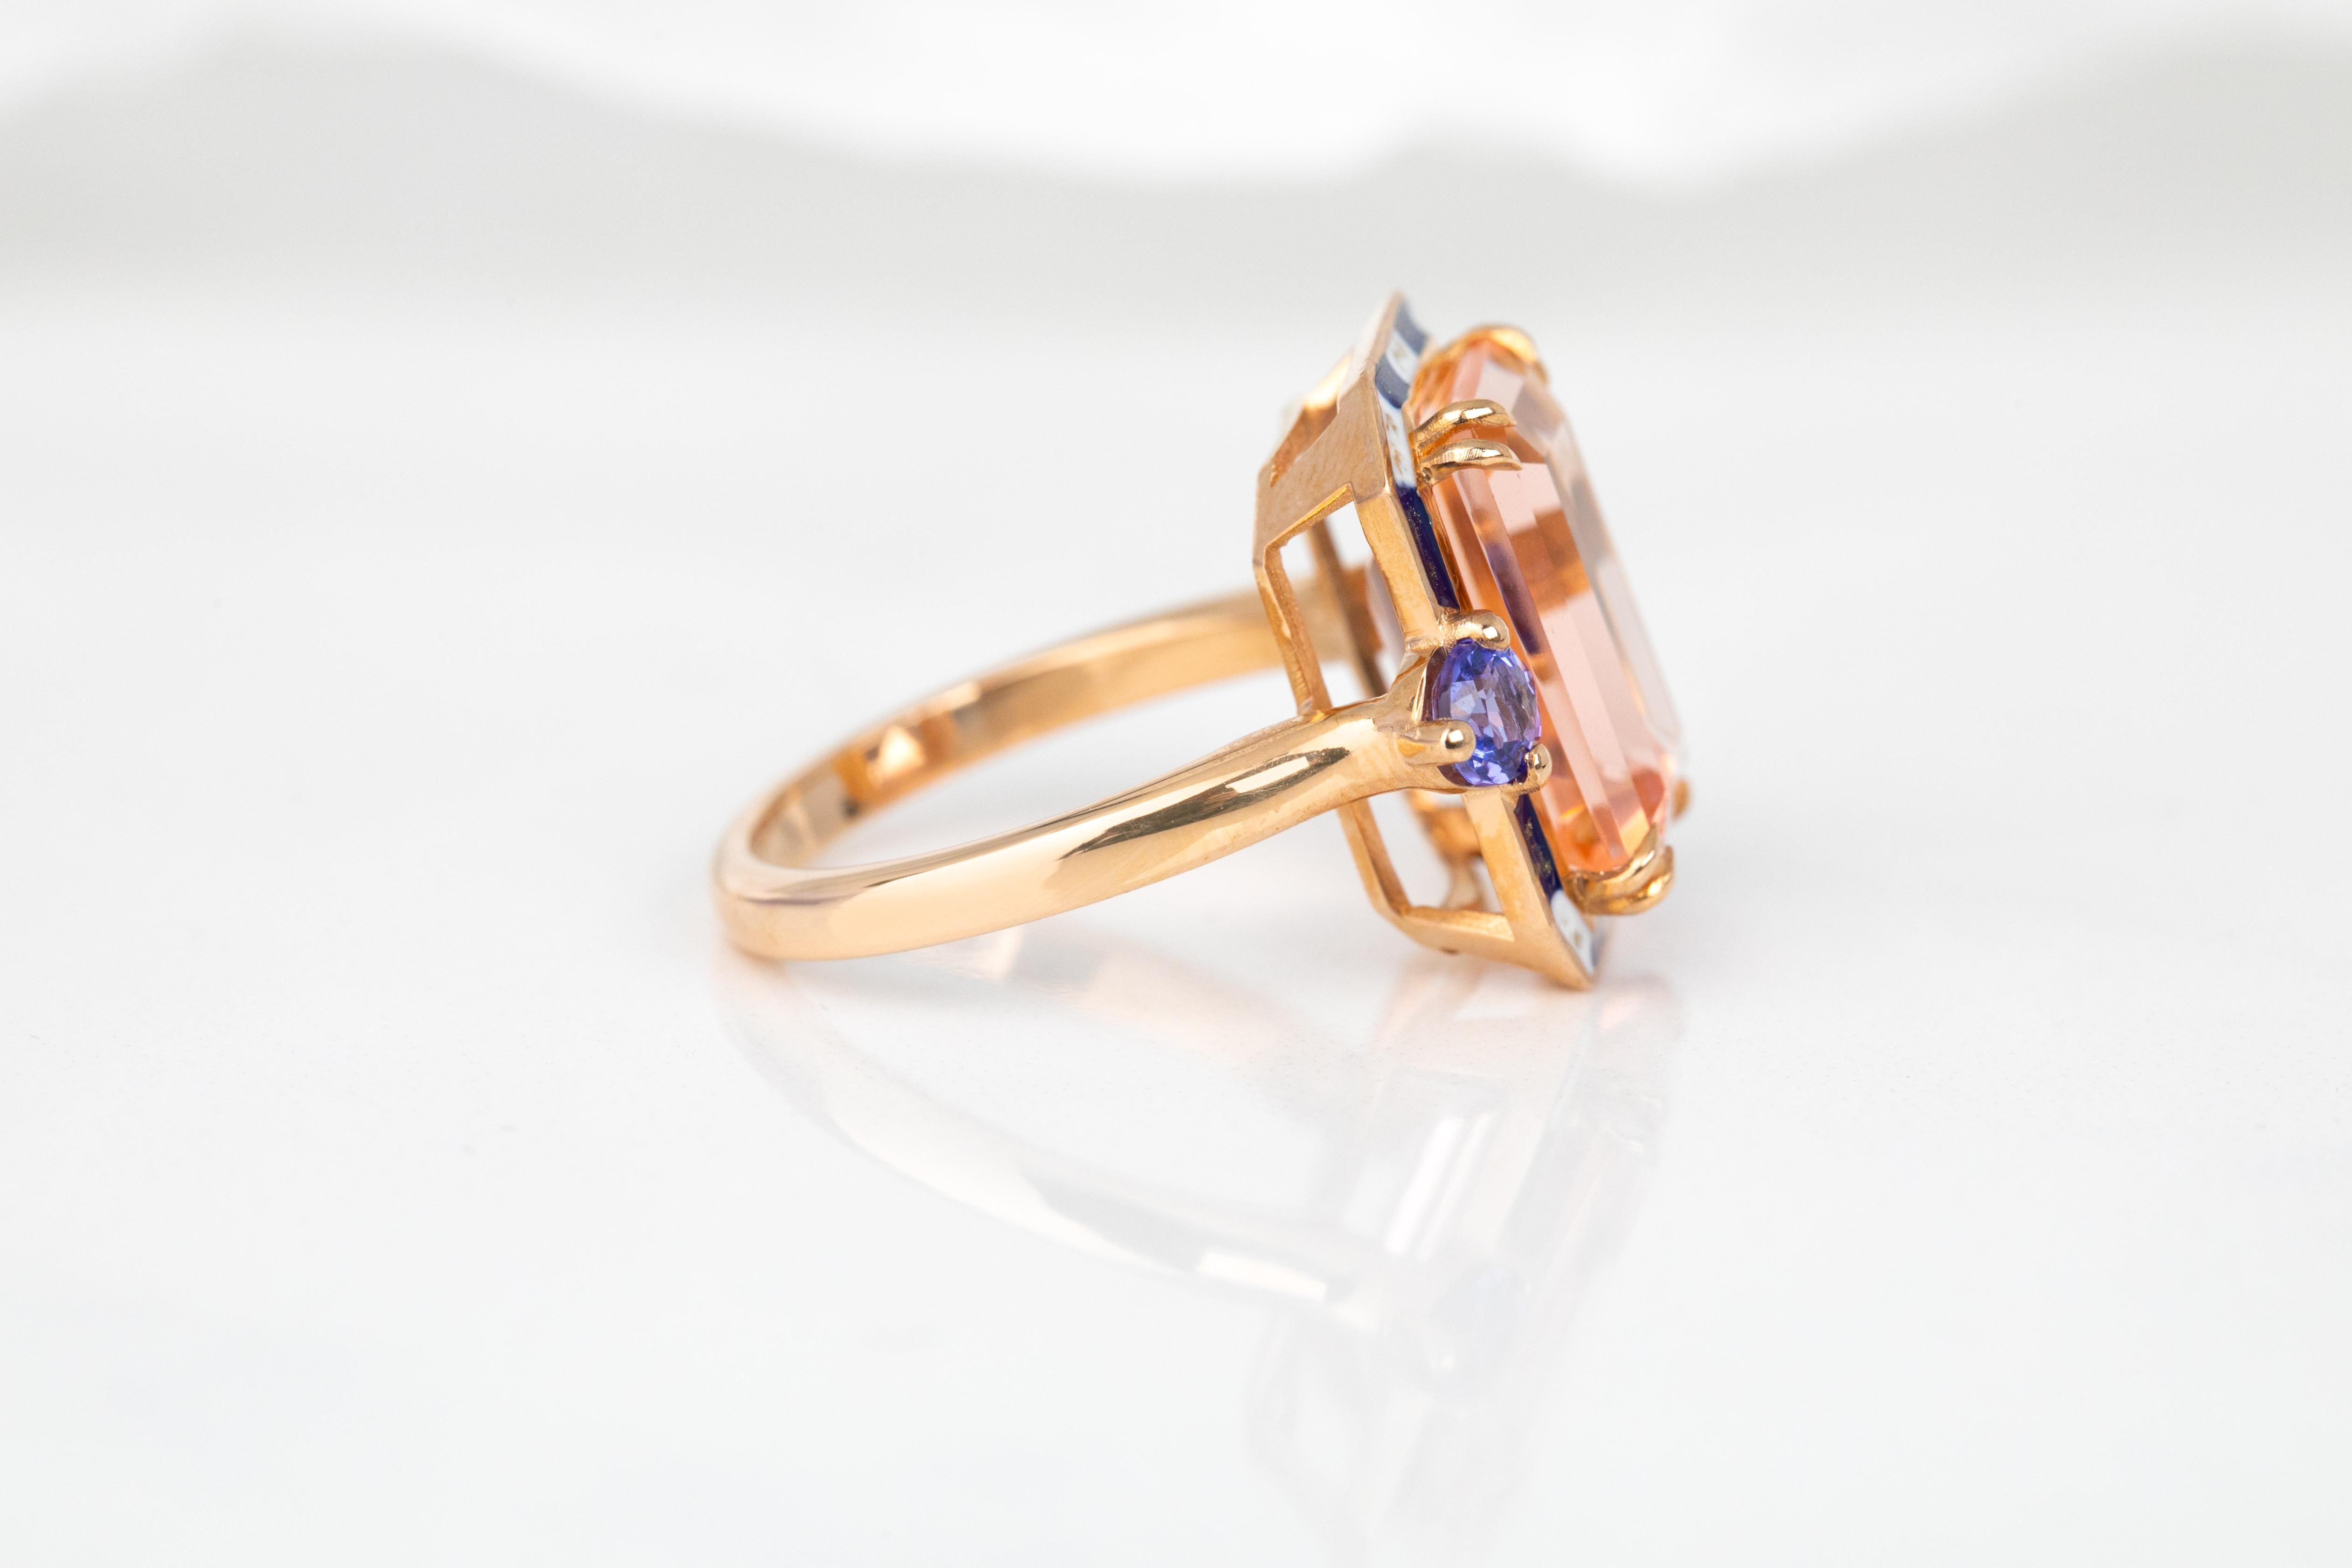 For Sale:  Art Deco Style 14k Solid Gold, Pink Quartz and Ceylon Sapphire Stone Ring 17